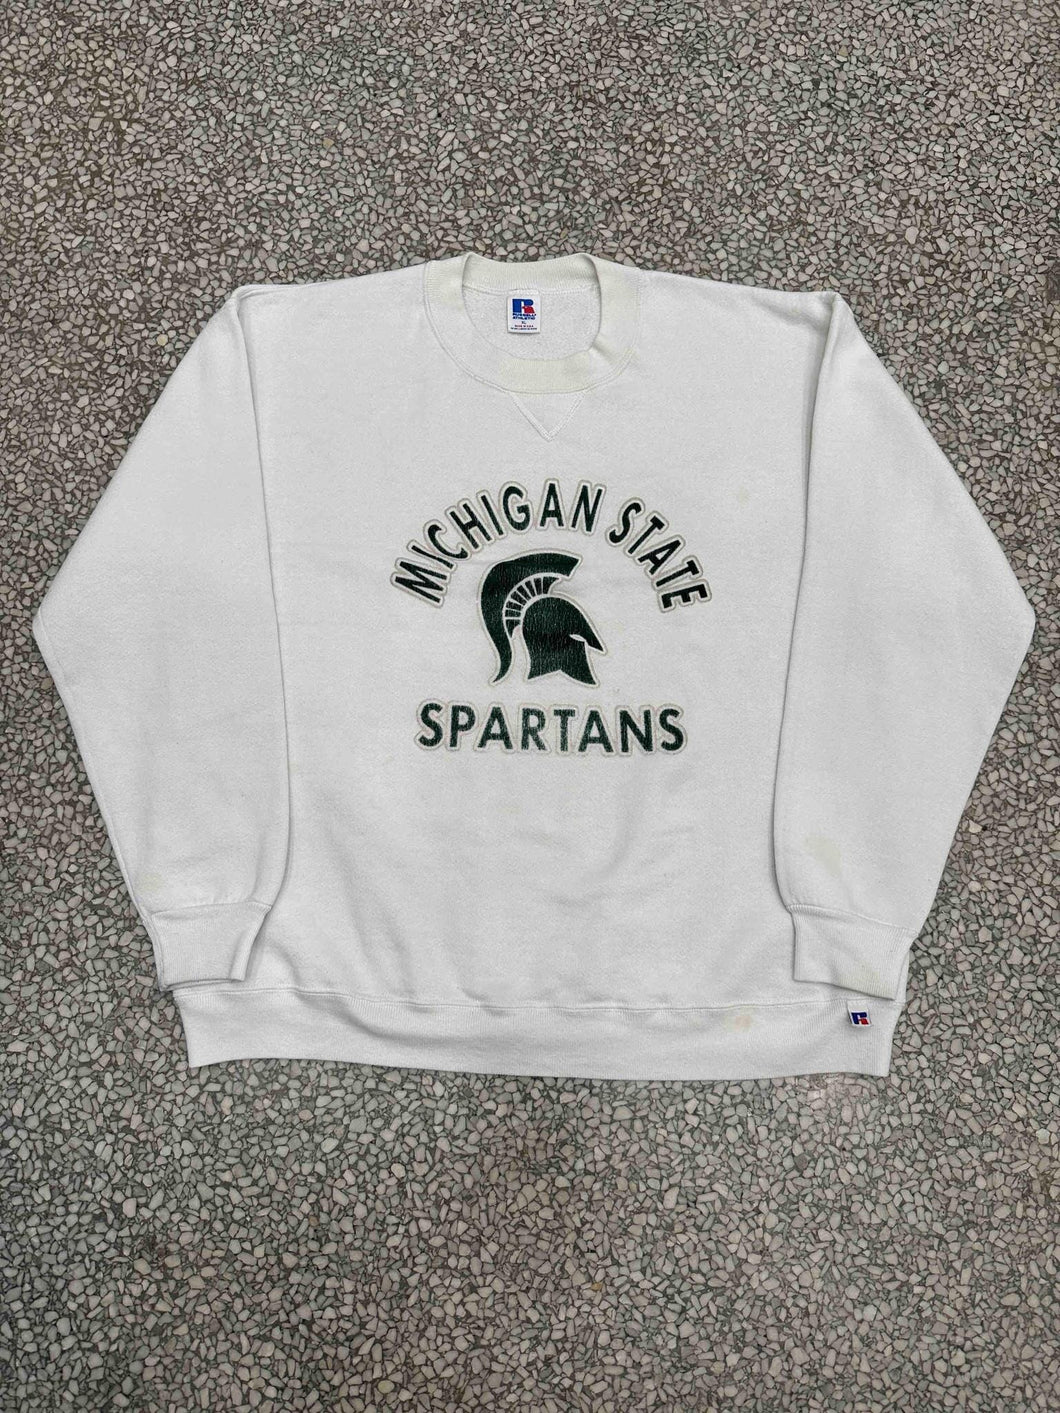 Michigan State Vintage 90s Chenille Spartans Russell Crewneck Faded White ABC Vintage 